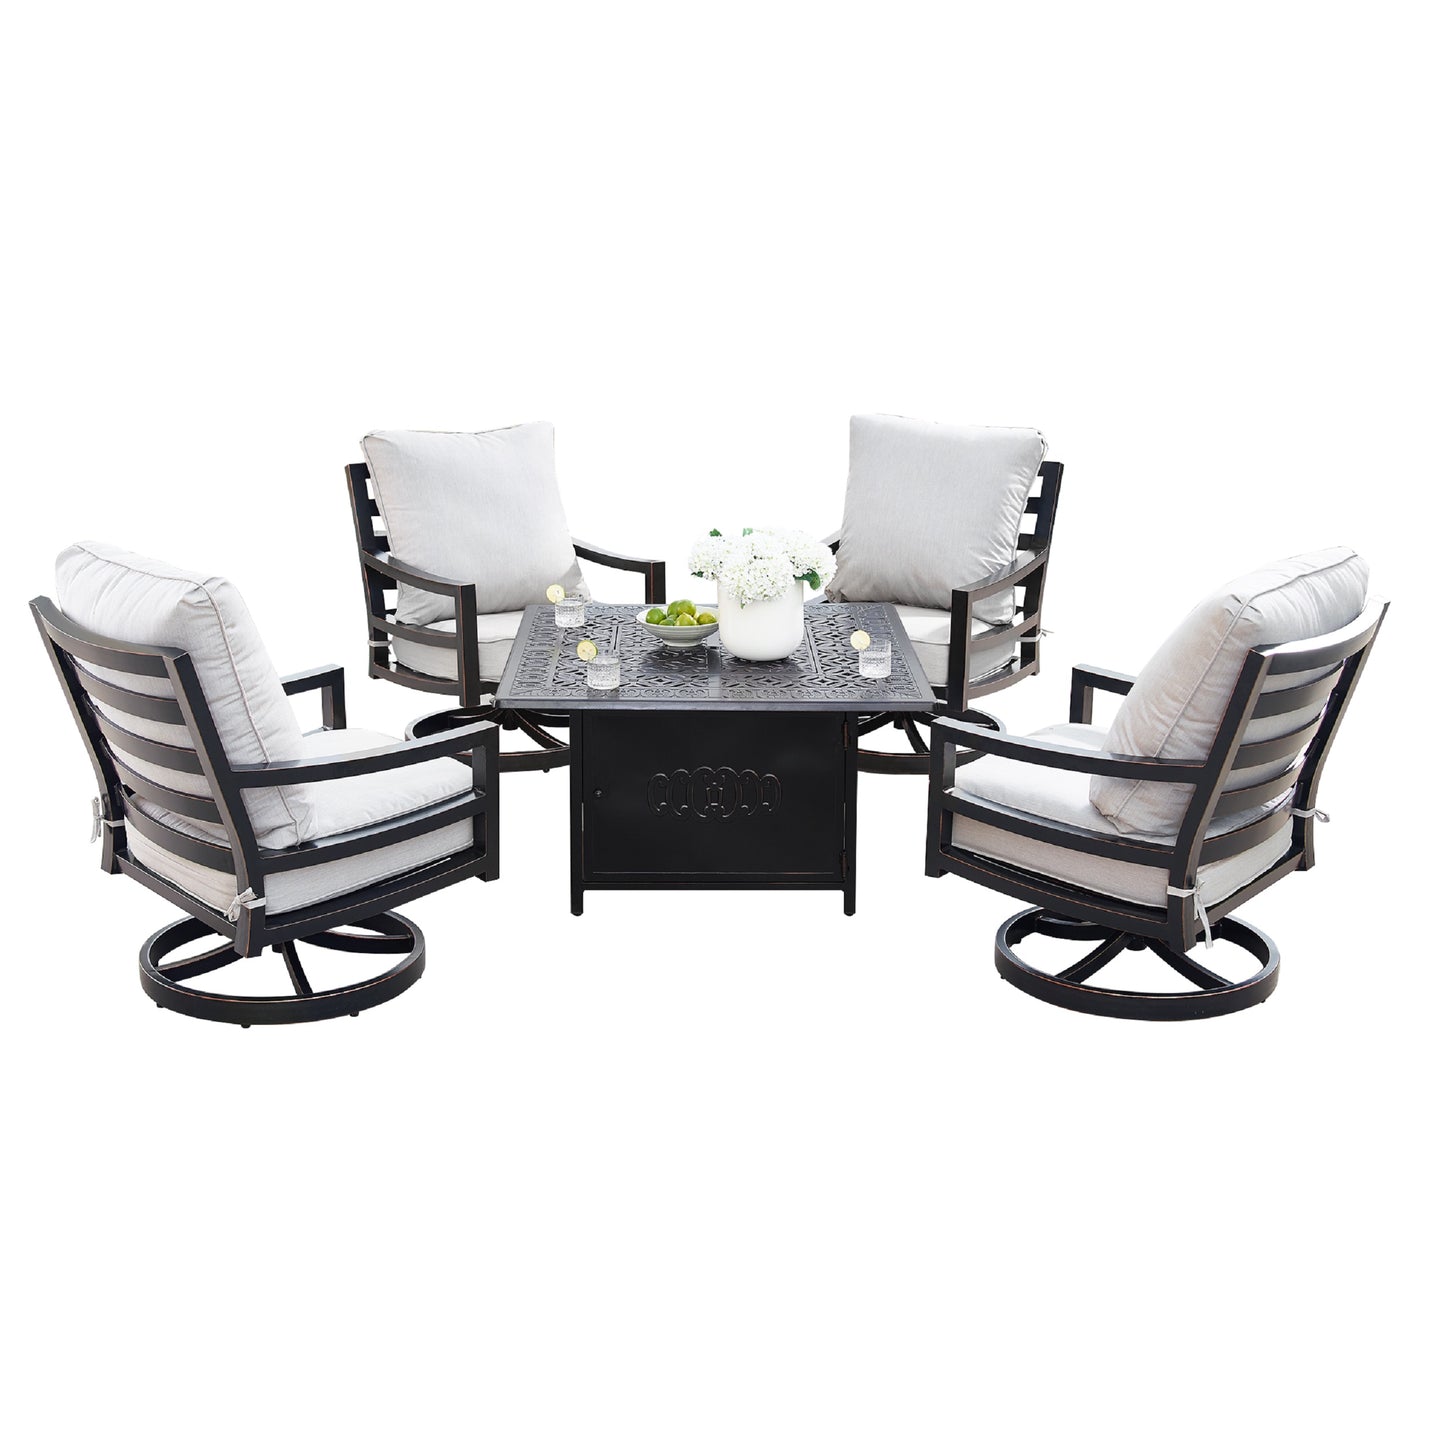 Aluminum 42-in Square Patio Fire Table Set with Swivel Rocking Chairs